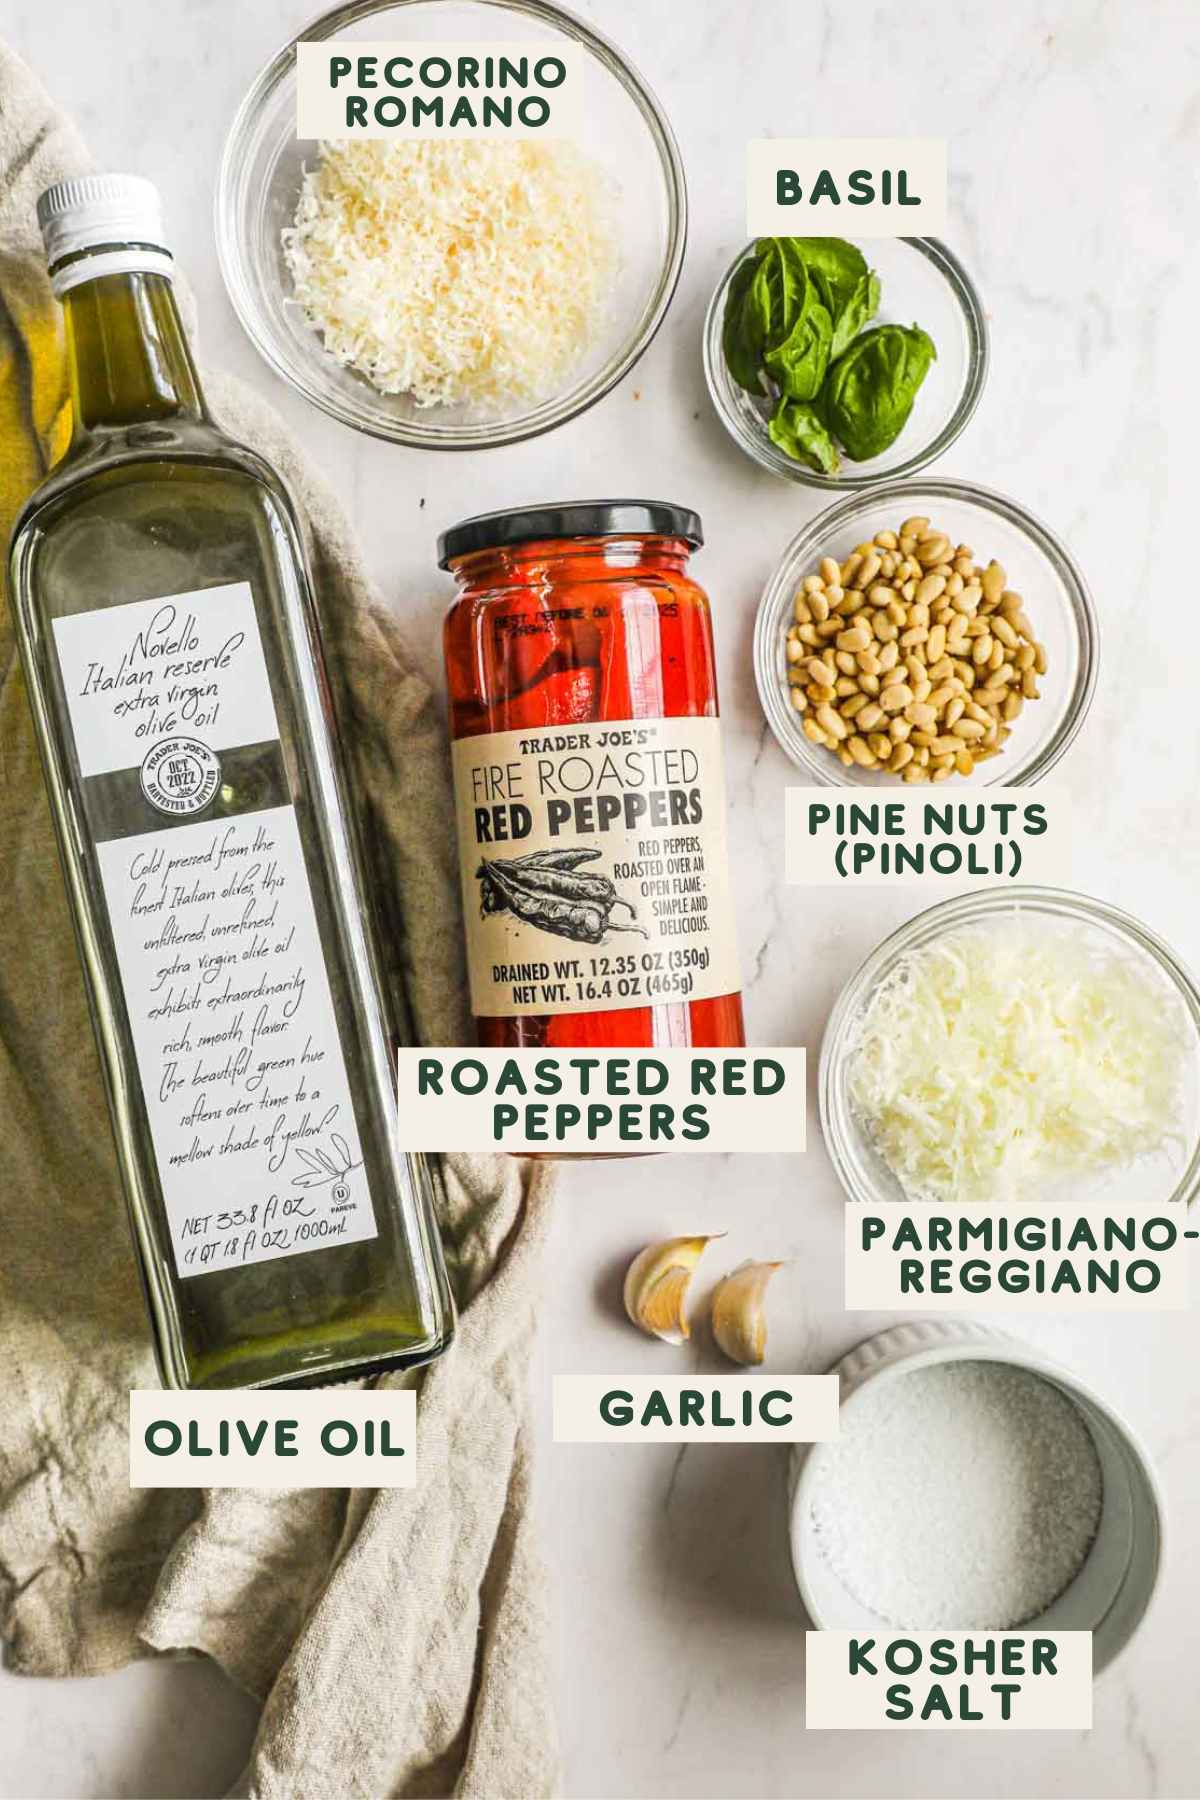 Ingredients to make roasted red pepper pesto, including roasted red peppers, pecorino romano, parmigiano-reggiano, olive oil, basil, pine nuts, and kosher salt.